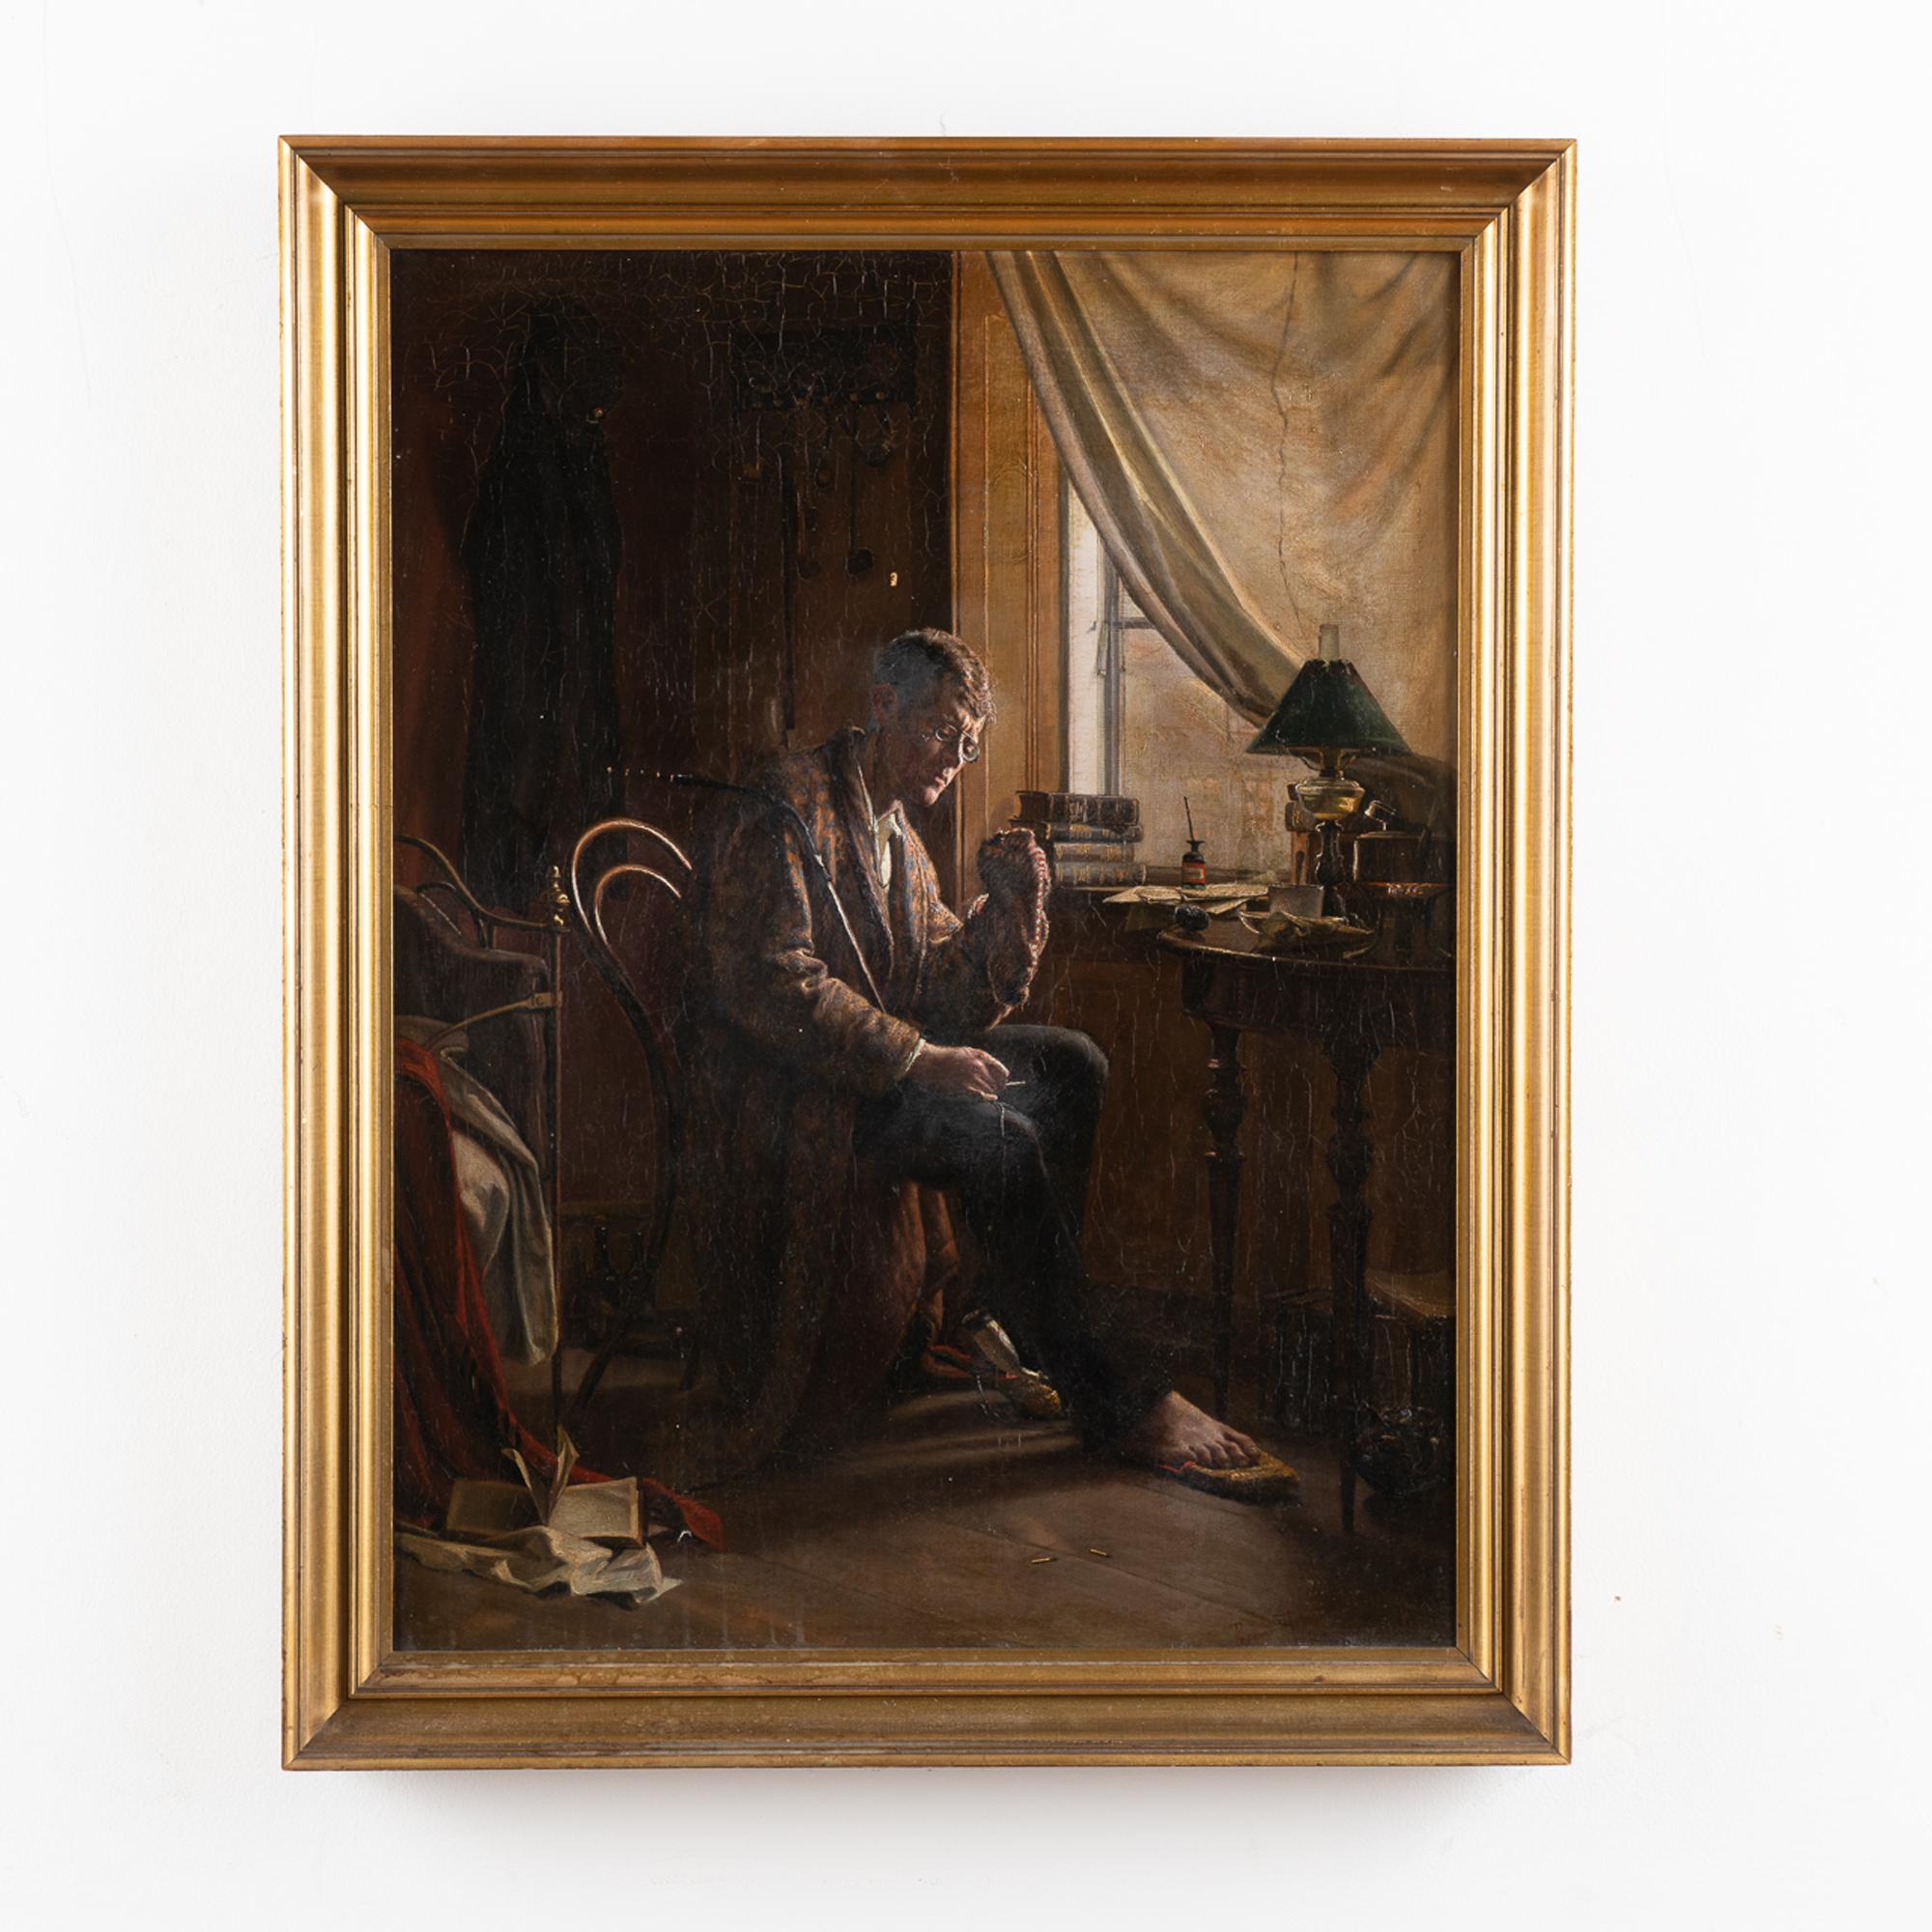 Original oil on canvas painting by Christian Pram-Henningsen (Denmark 1846-1892).
Subject is a young student darning his socks by the light of a window.
Oil on canvas. Signed and dated (lower right corner) 1881.
Has craquelure throughout, two